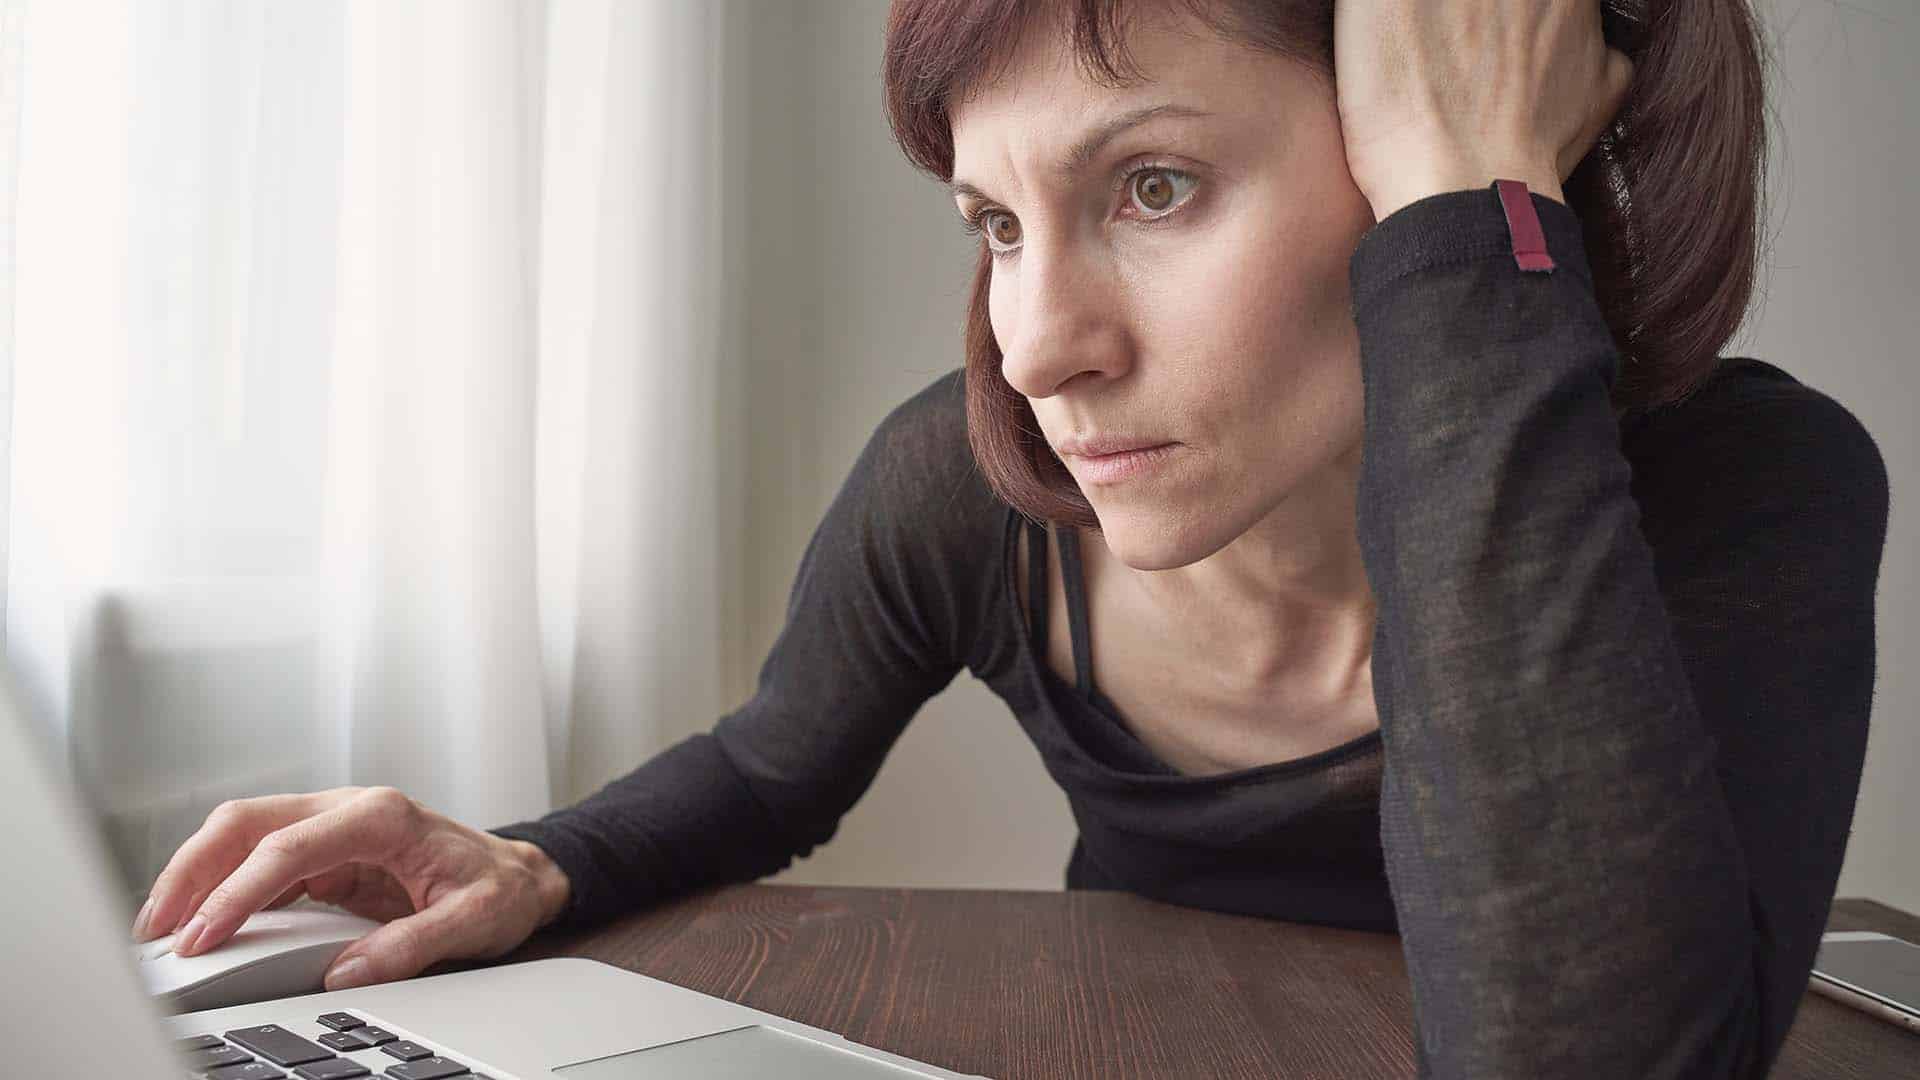 Woman is looking for information on Internet, nervous, focused. Concept for digital addiction. Adult mature female looks attentively and excitedly at computer. Anxiety, stress, fear.